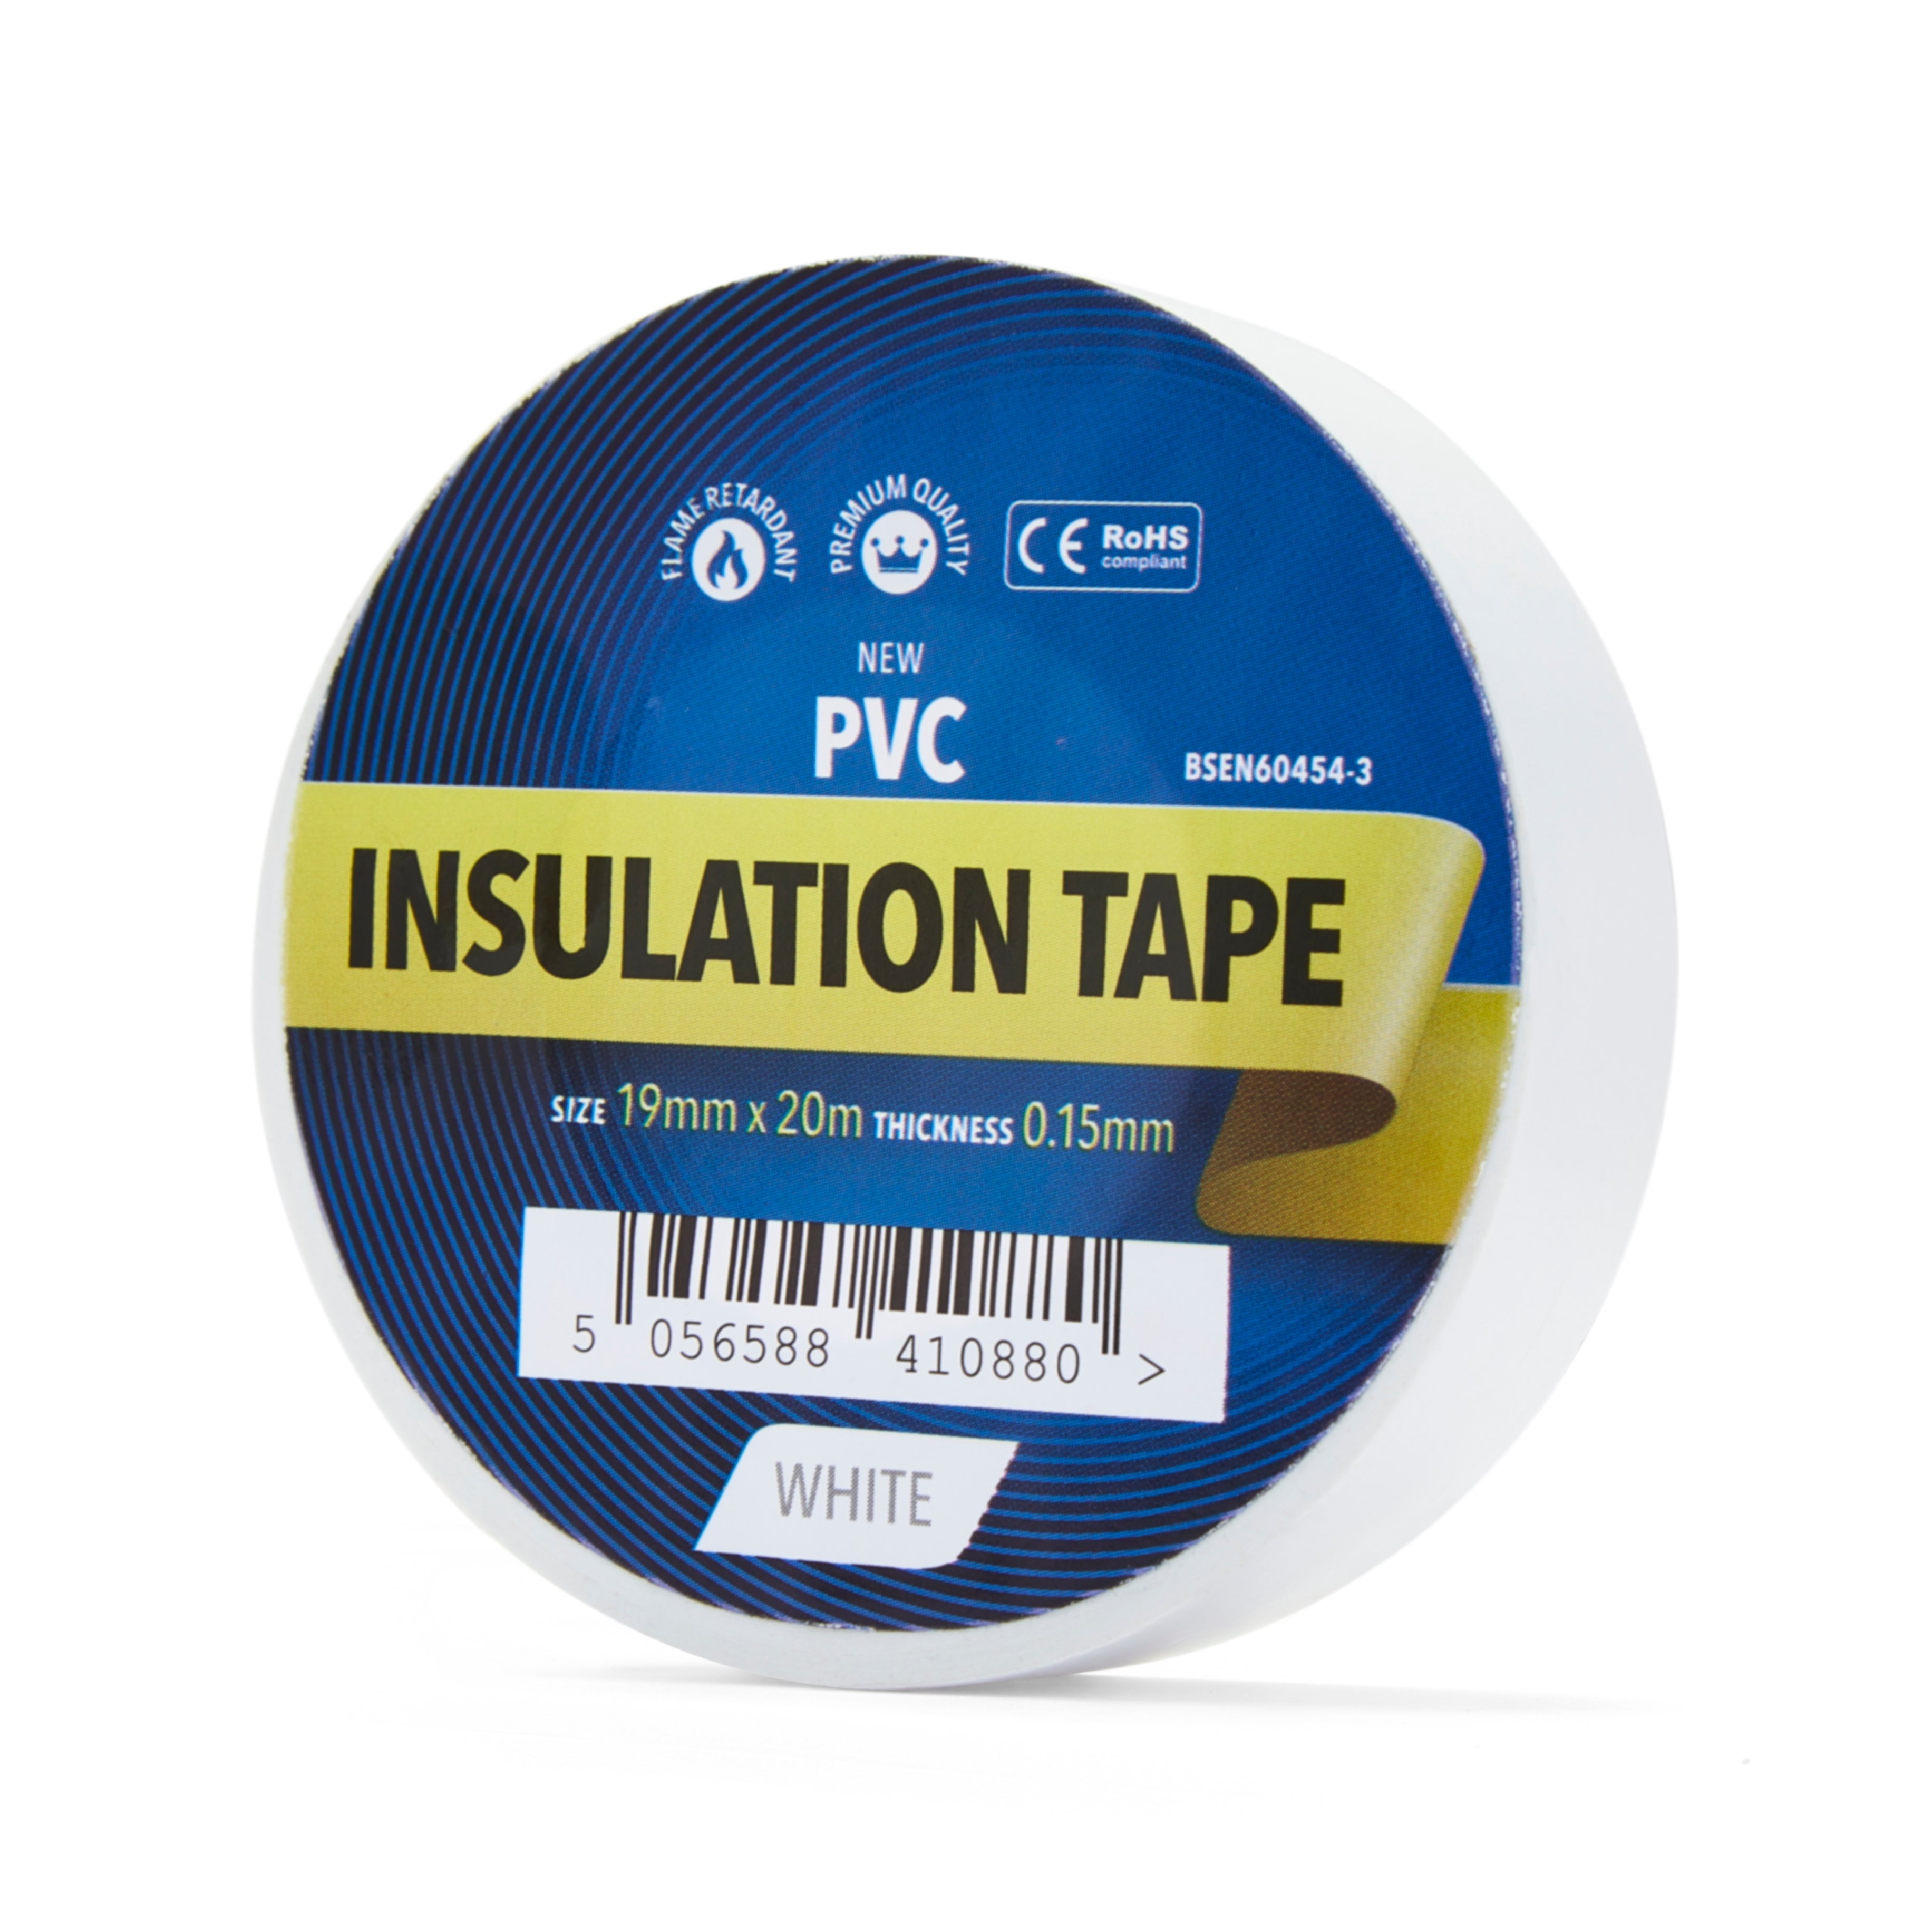 White Electrical Tape 19mm - PVC Insulation Tape